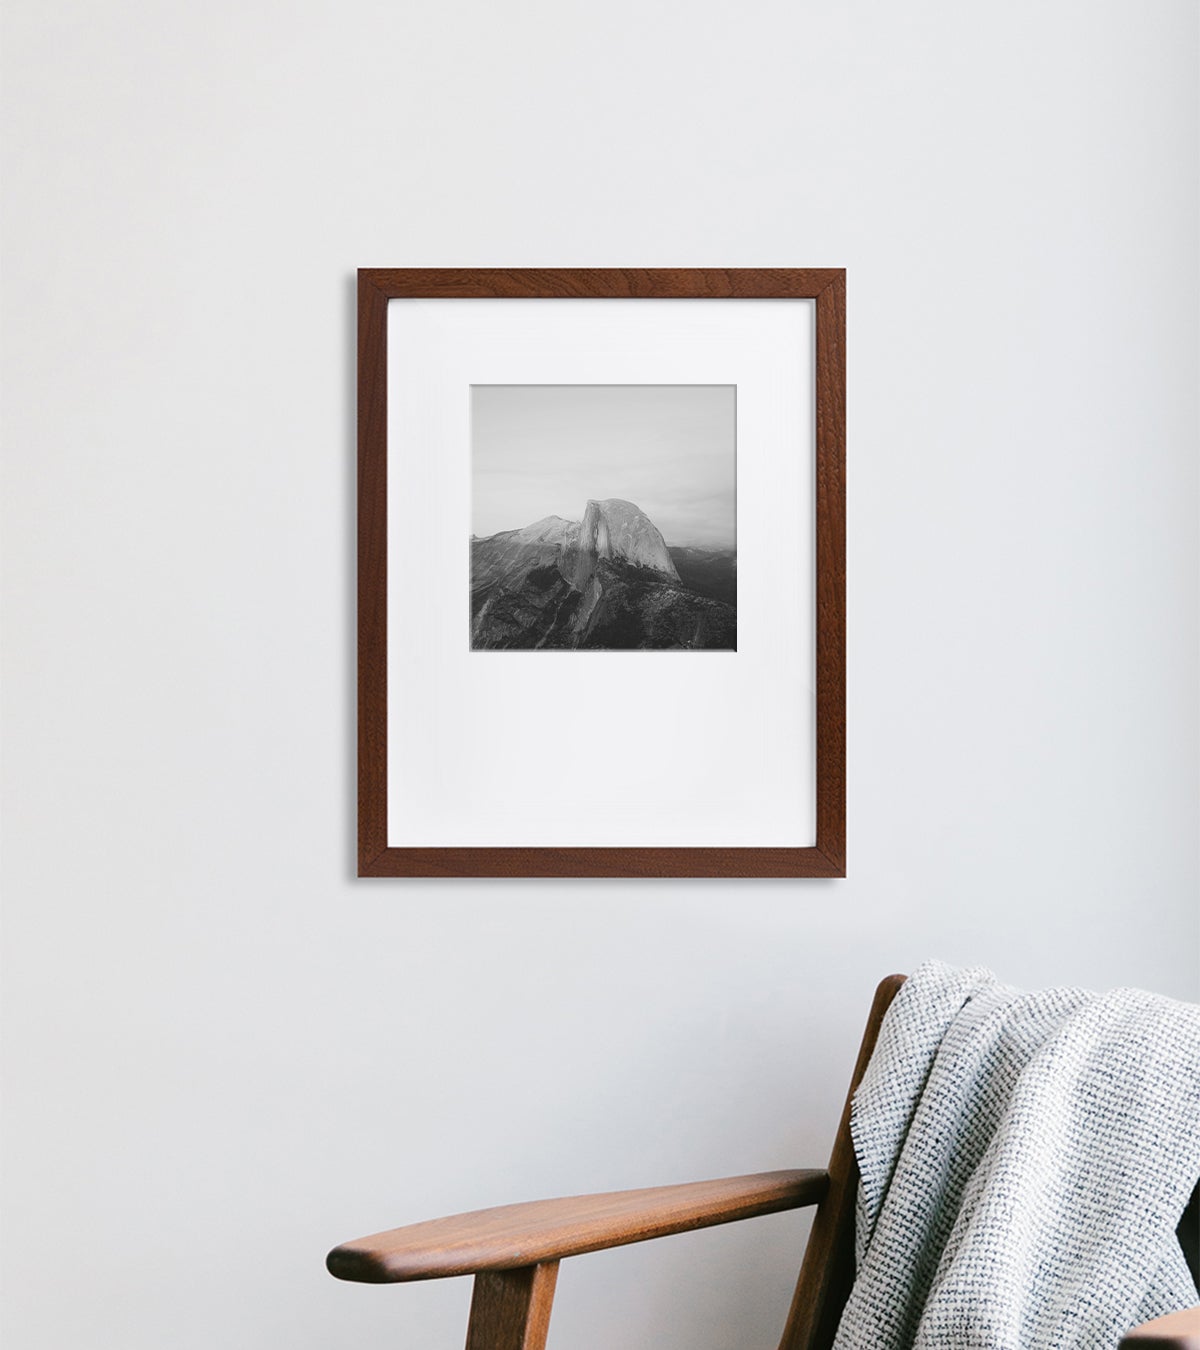 Black and white photo of mountain landscape matted to a 10 inch square inside a 16 x 20 inch Walnut Artifact Uprising Gallery Frame